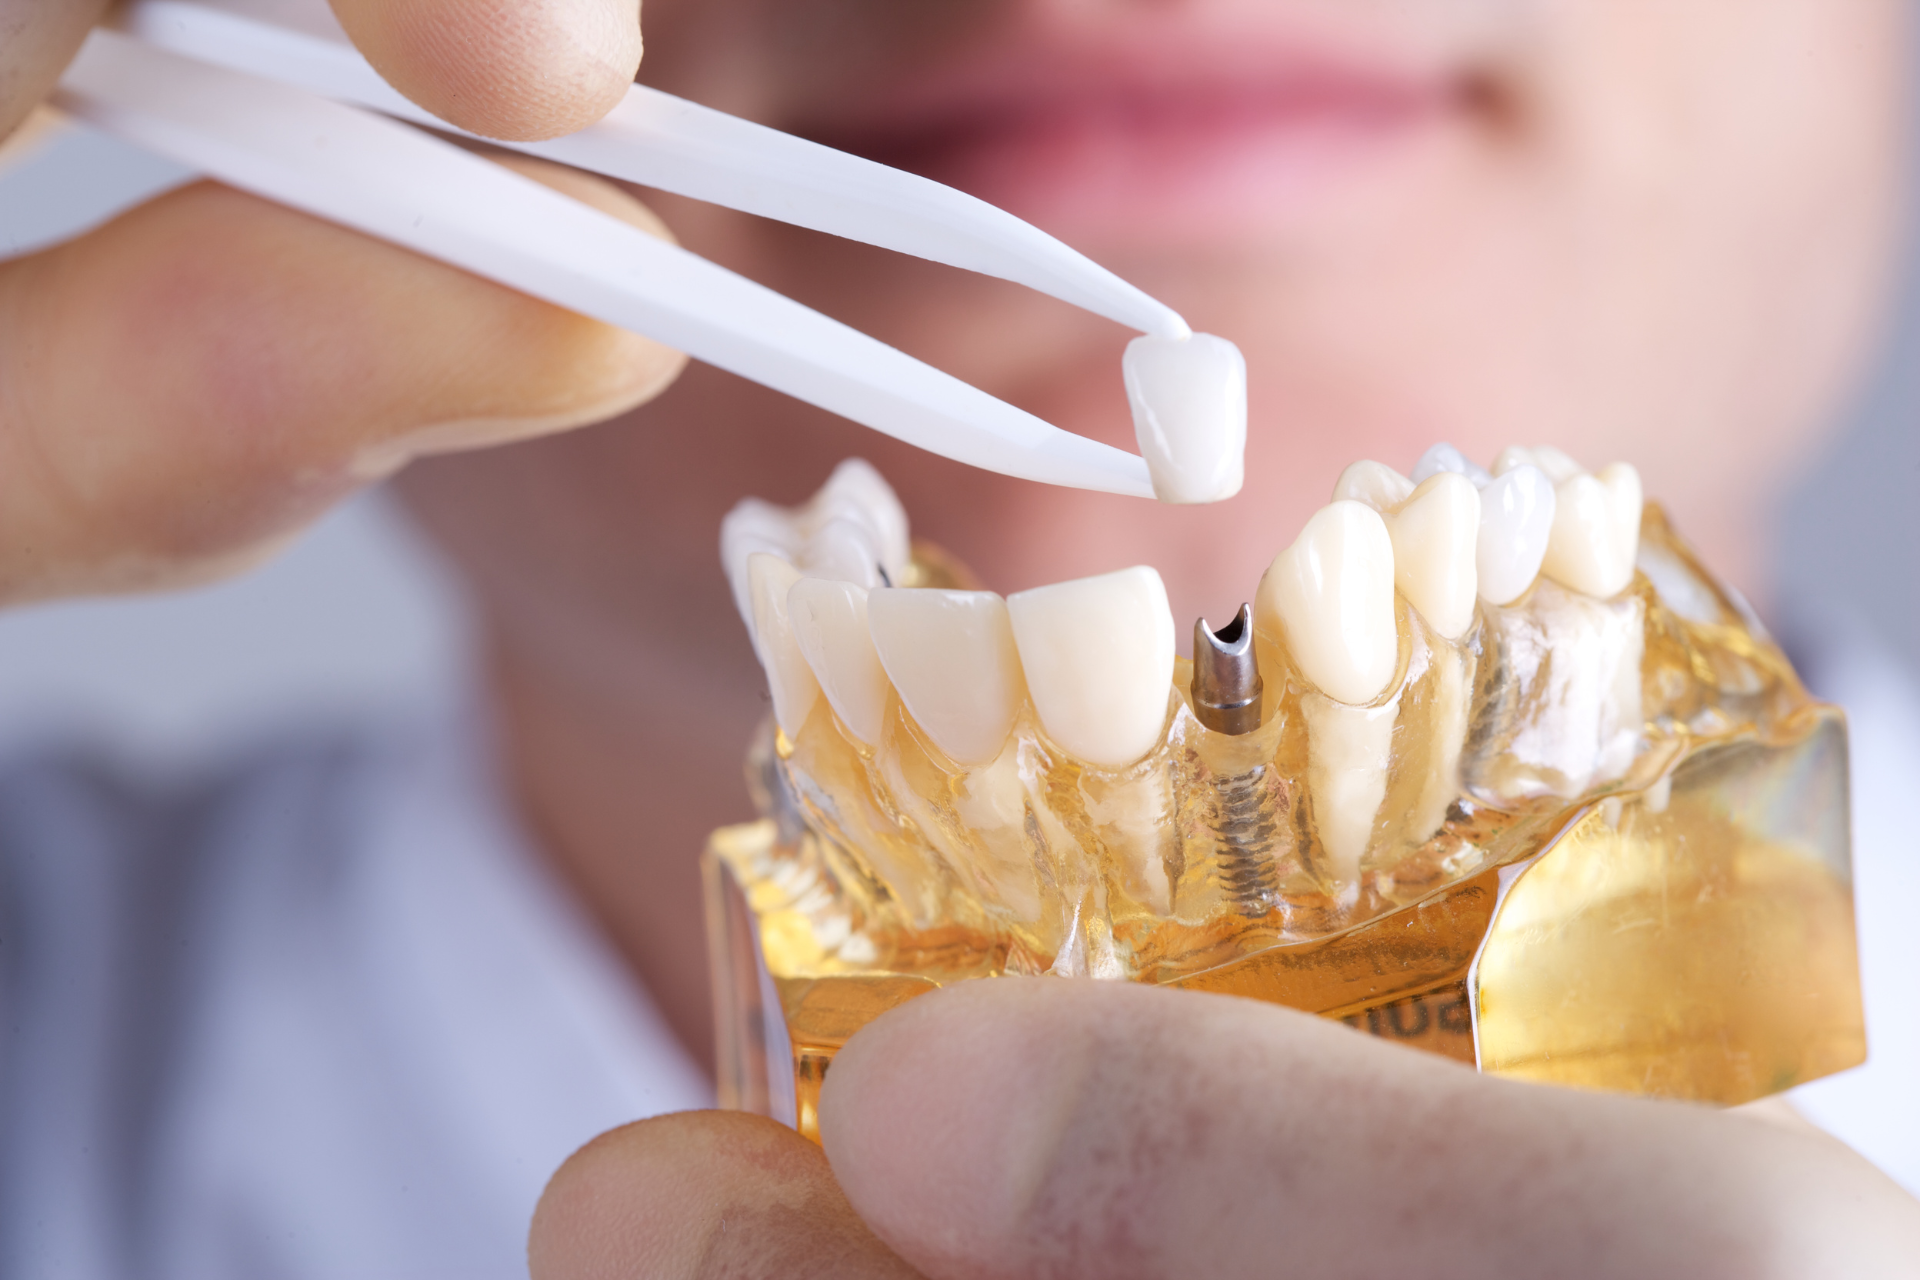 What Type of Dentist does Implants?